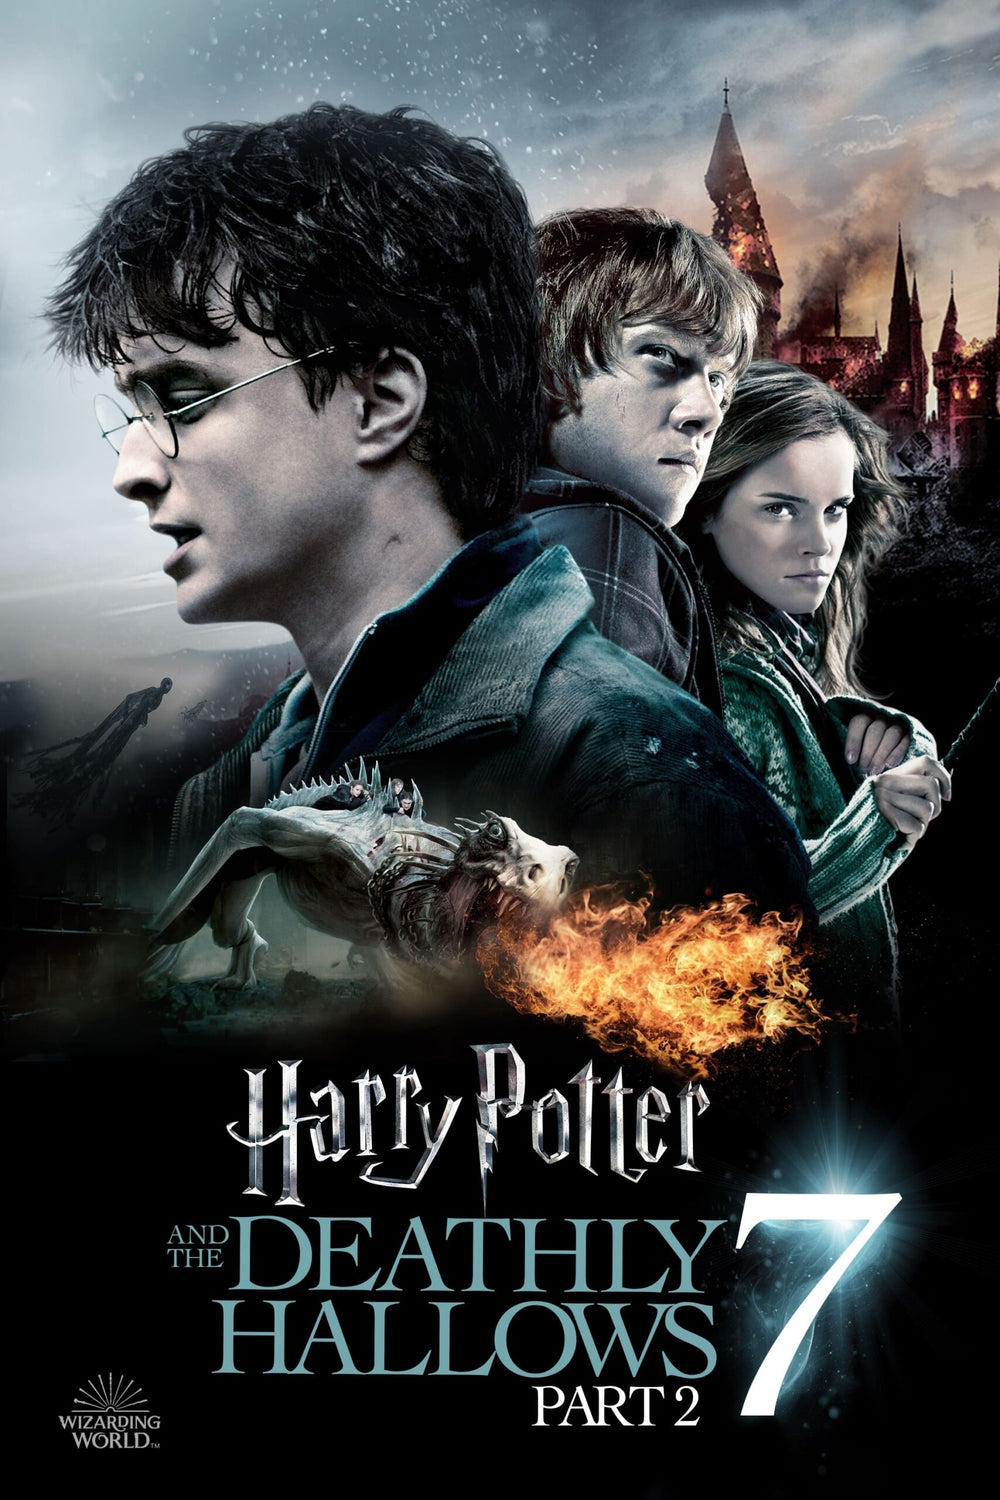 HARRY POTTER AND THE DEATHLY HALLOWS PART 2 4K Vudu/iTunes Via Moviesanywhere